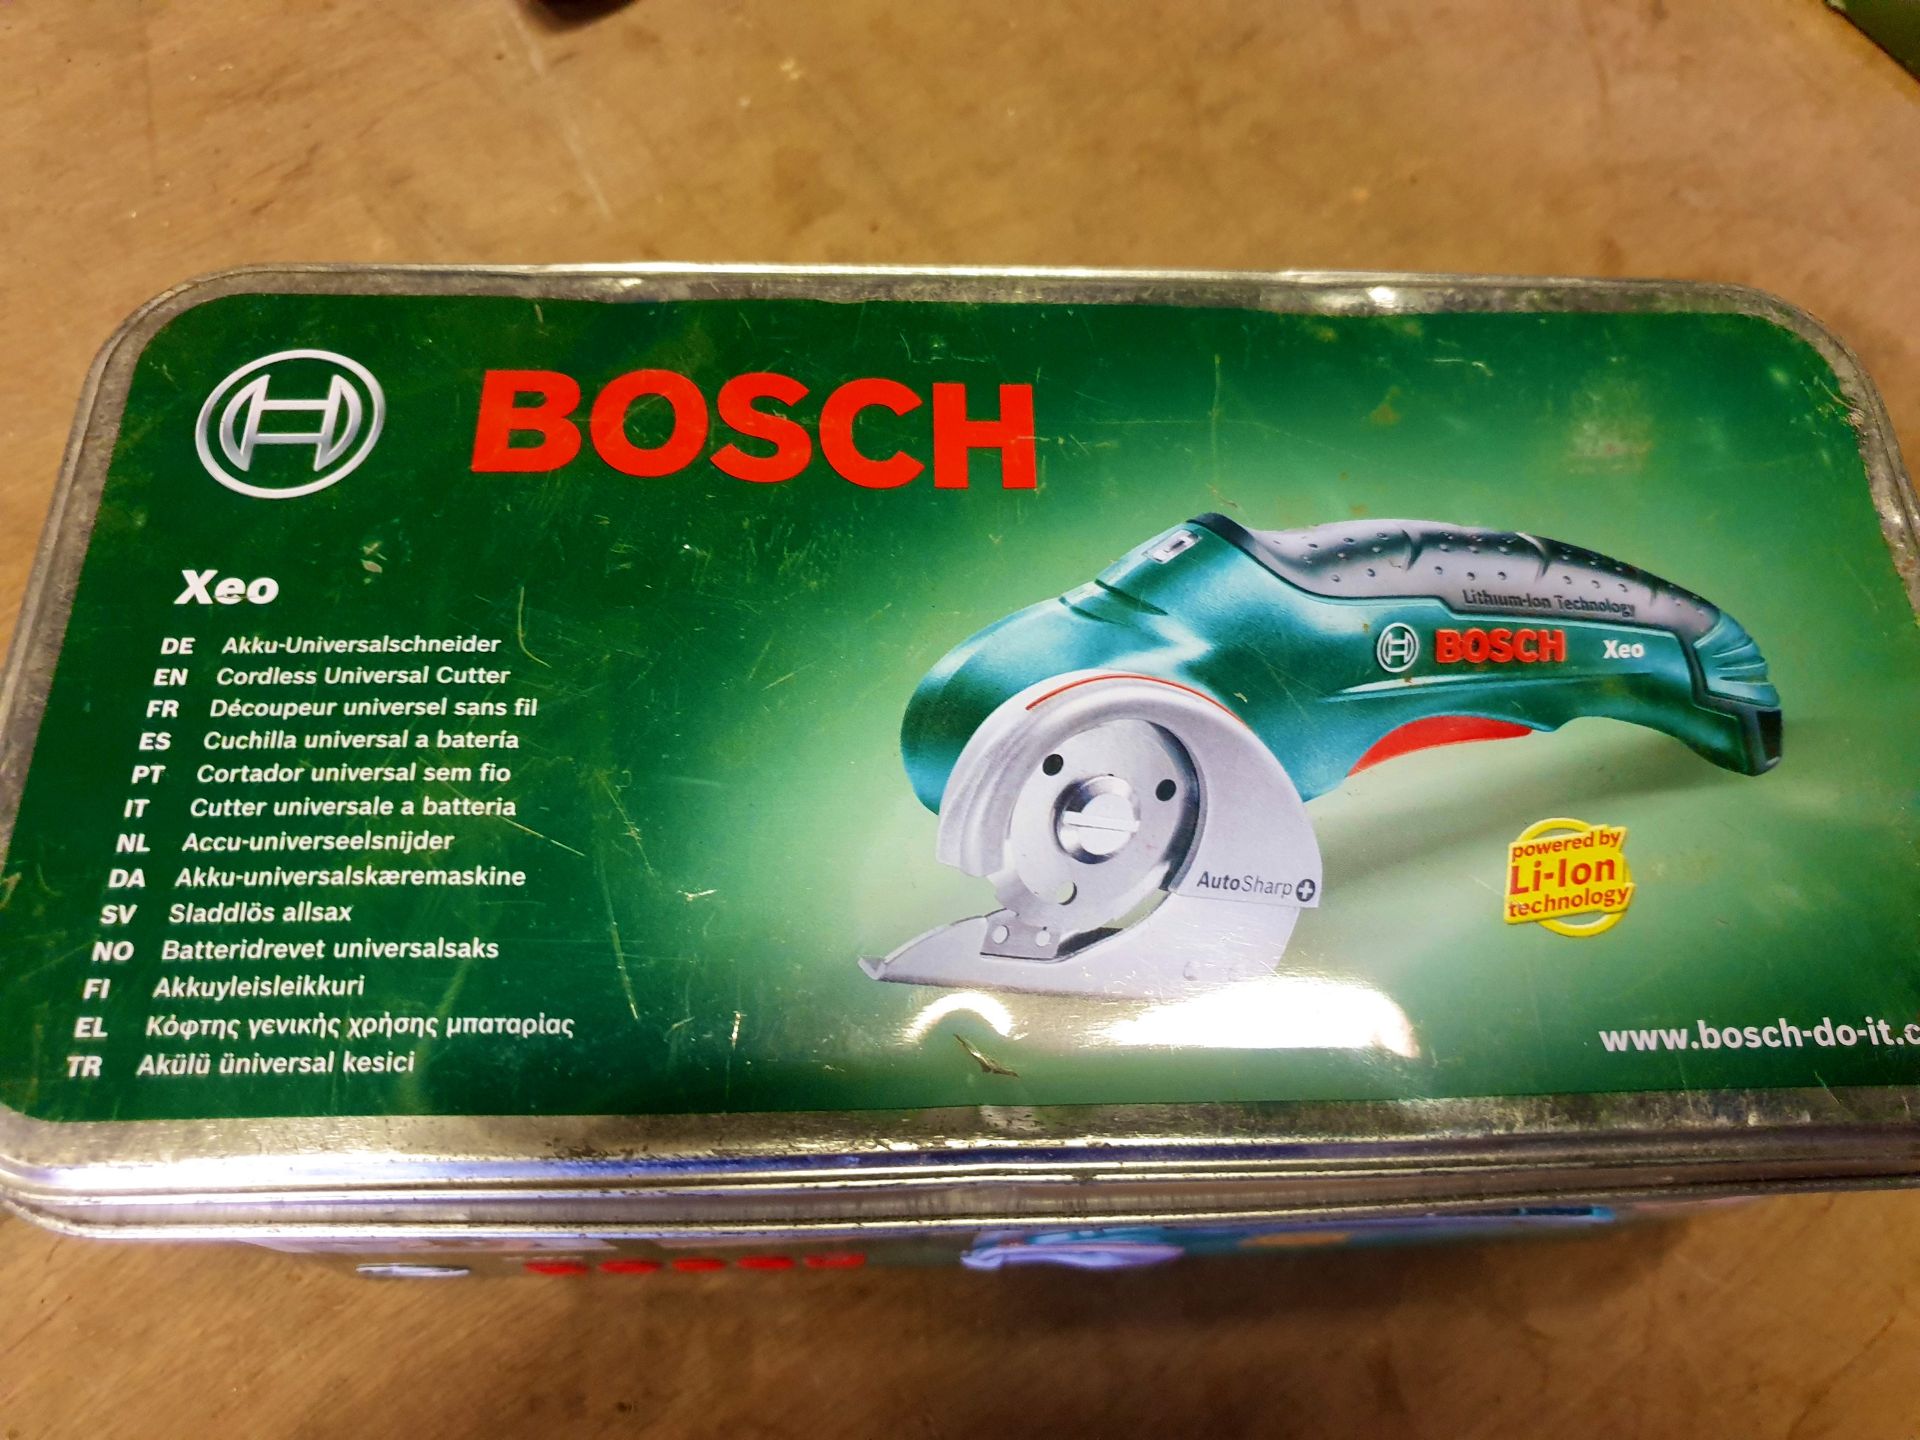 Bosch Universal Cutter - XEO - in original box - Used but in good condition - includes sharpener and